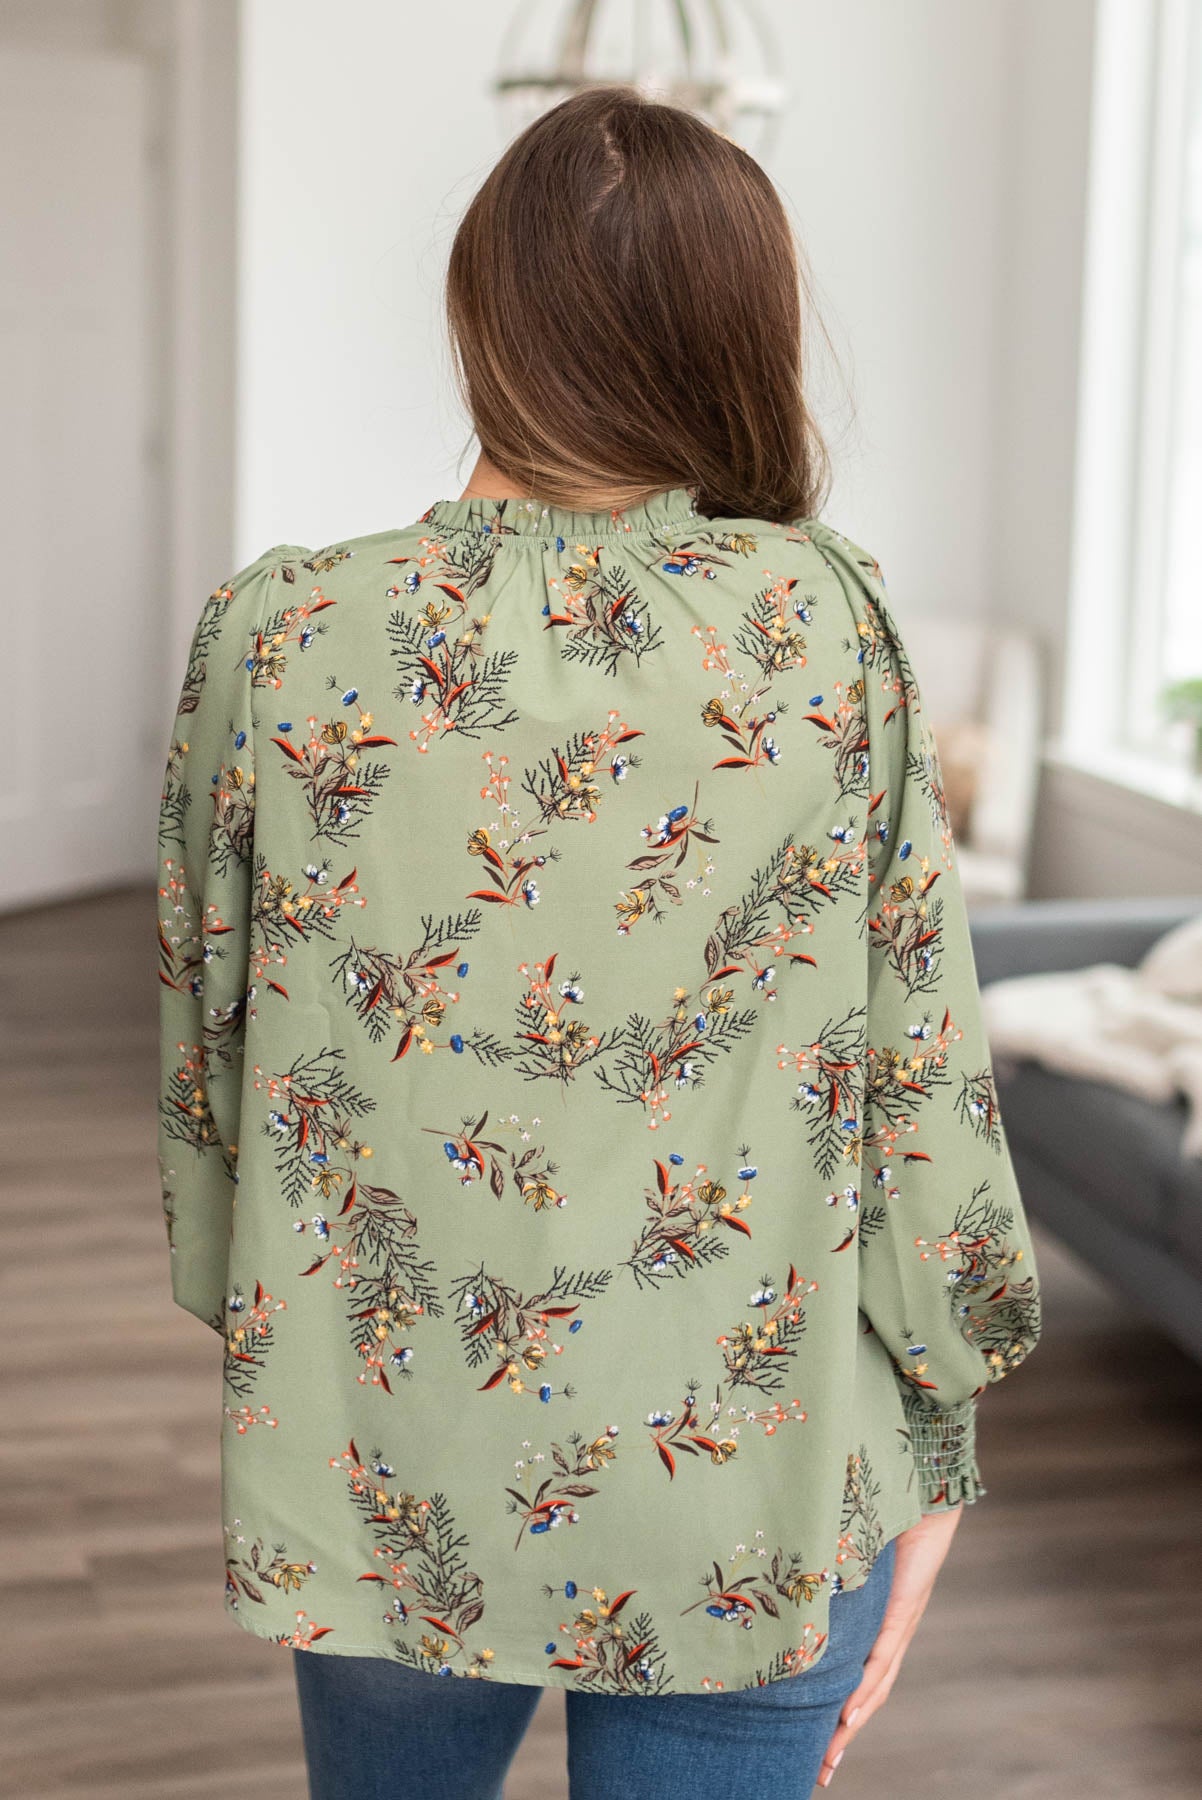 Back view of the sage floral blouse